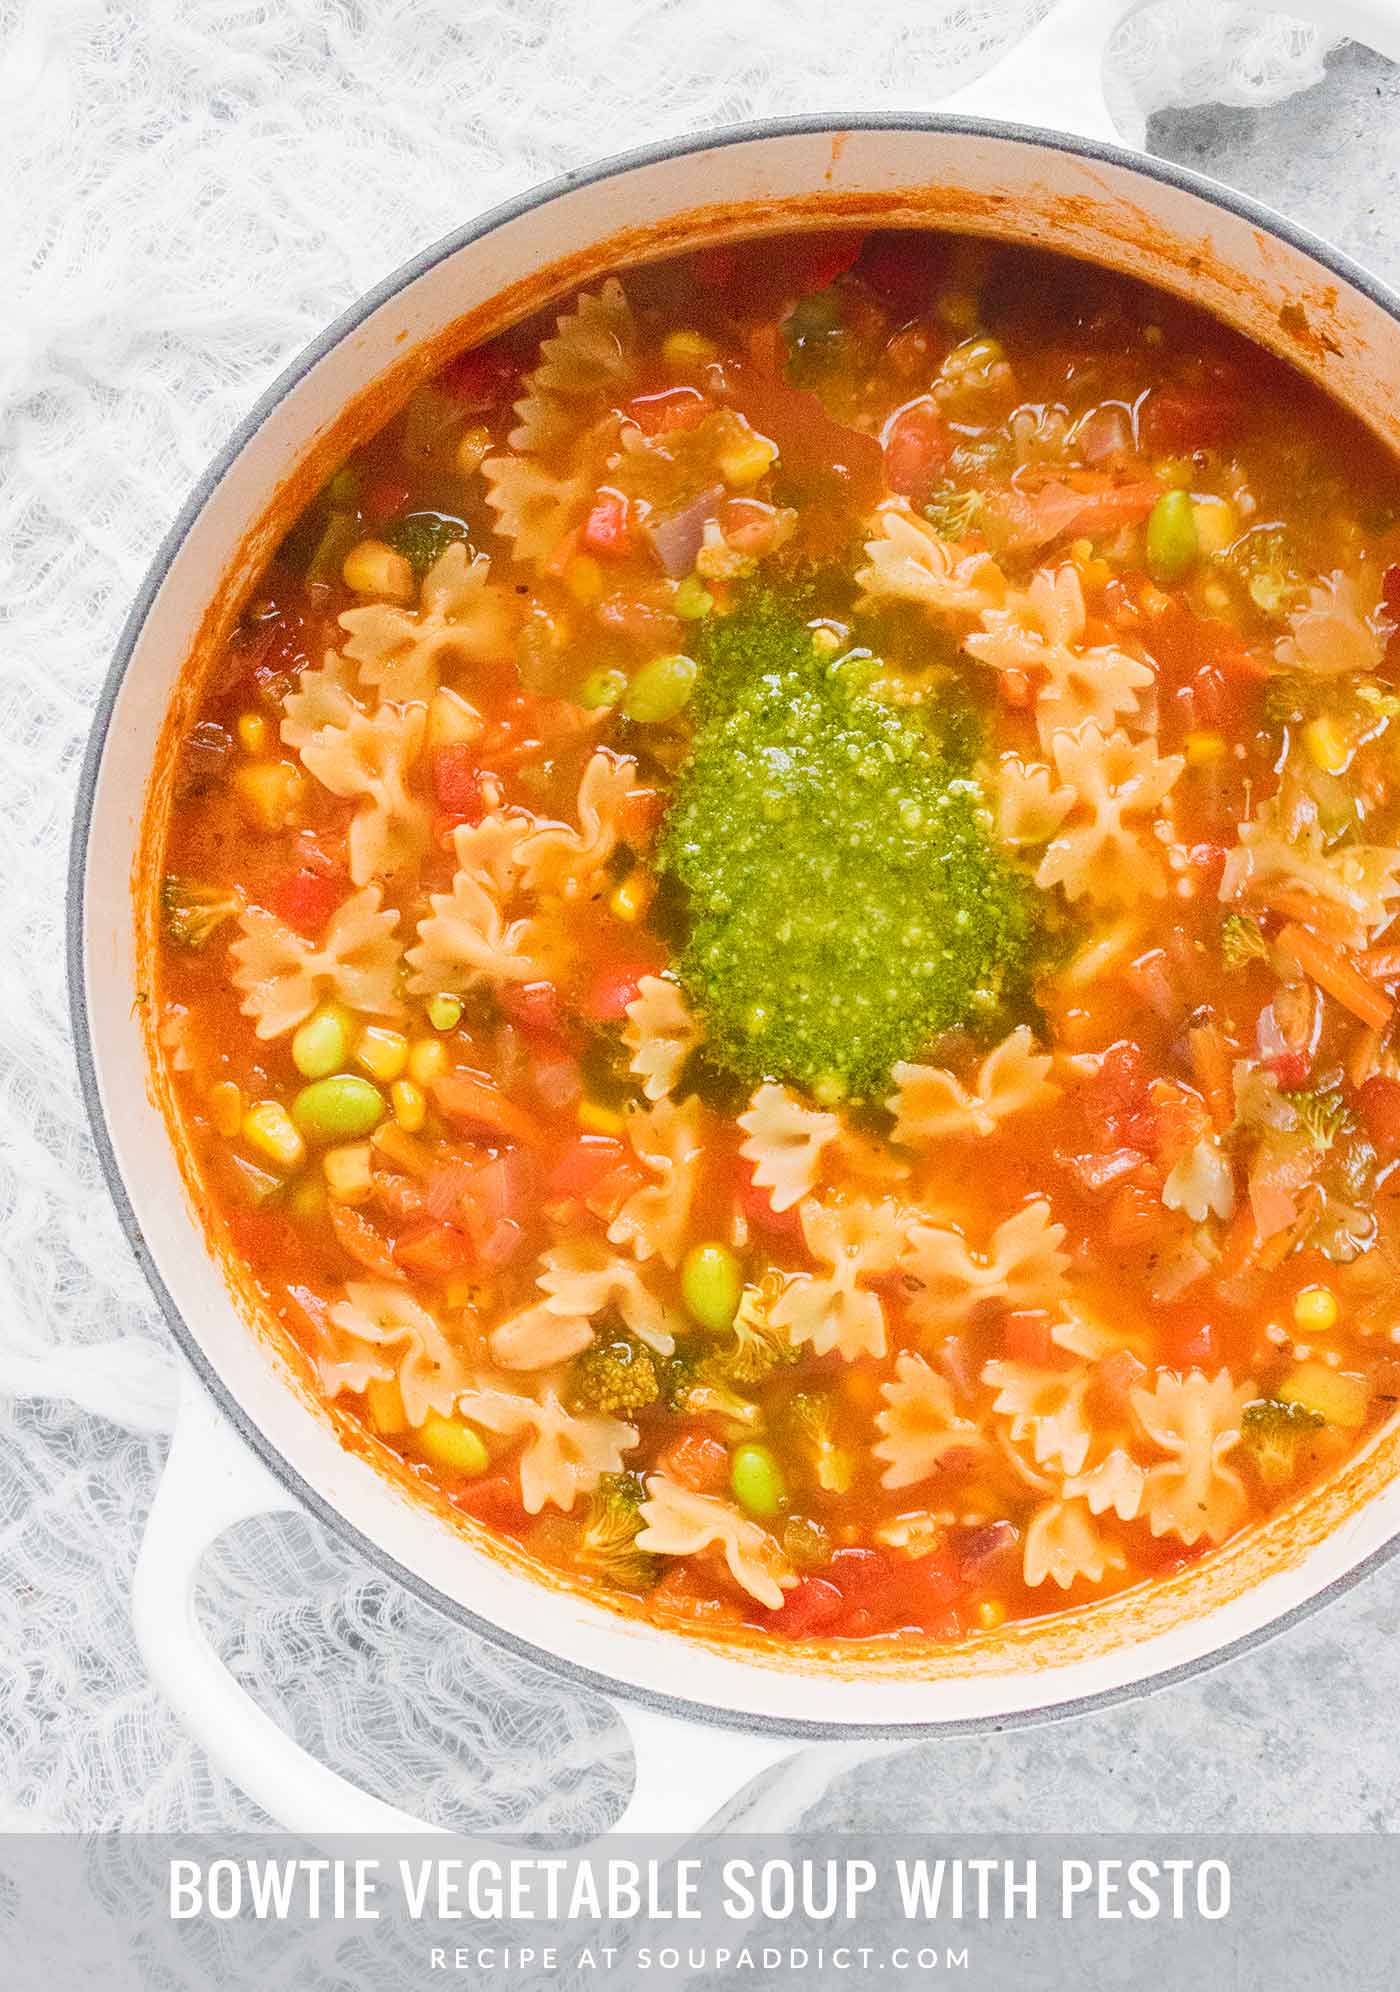 Bowtie Vegetable Soup with Pesto in a large white Dutch oven